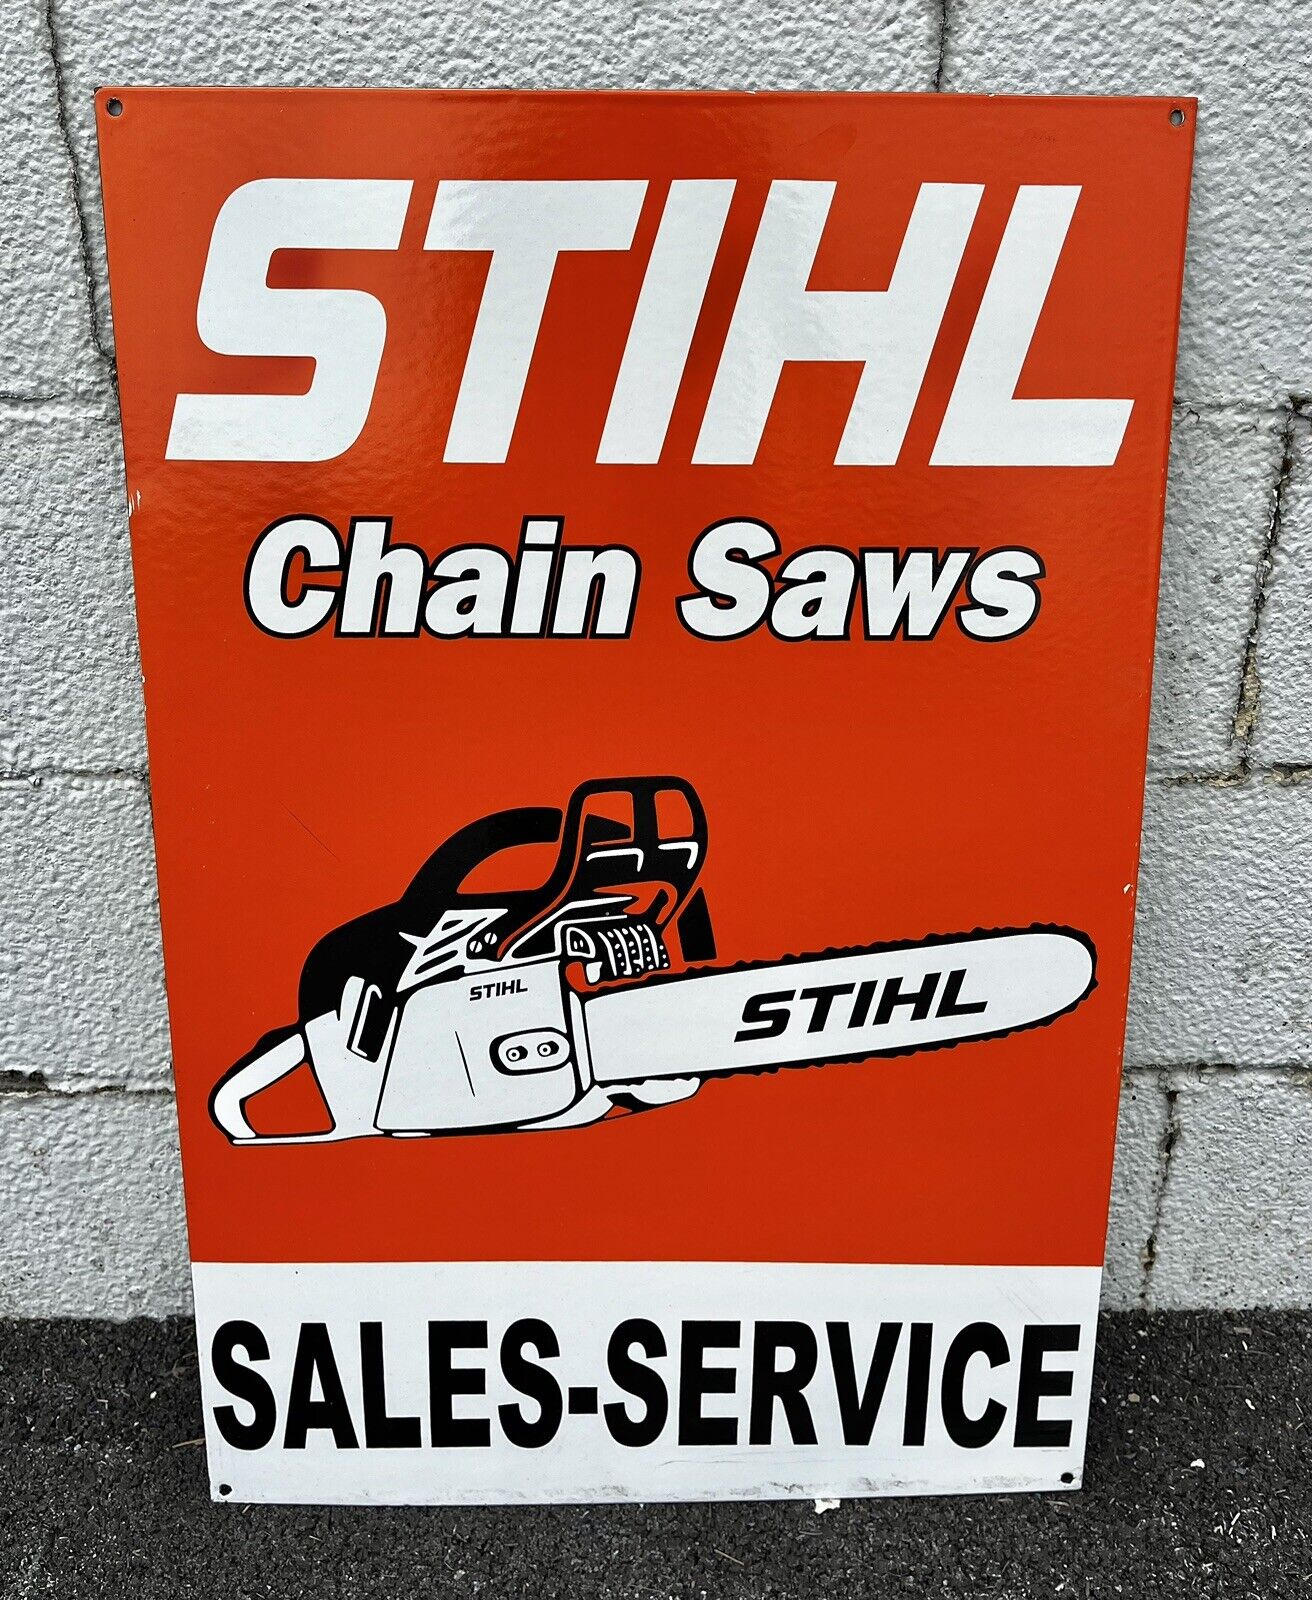 STIHL Chain Saws Chainsaw Sales & Service One-Sided Porcelain Sign, 30” x 20”